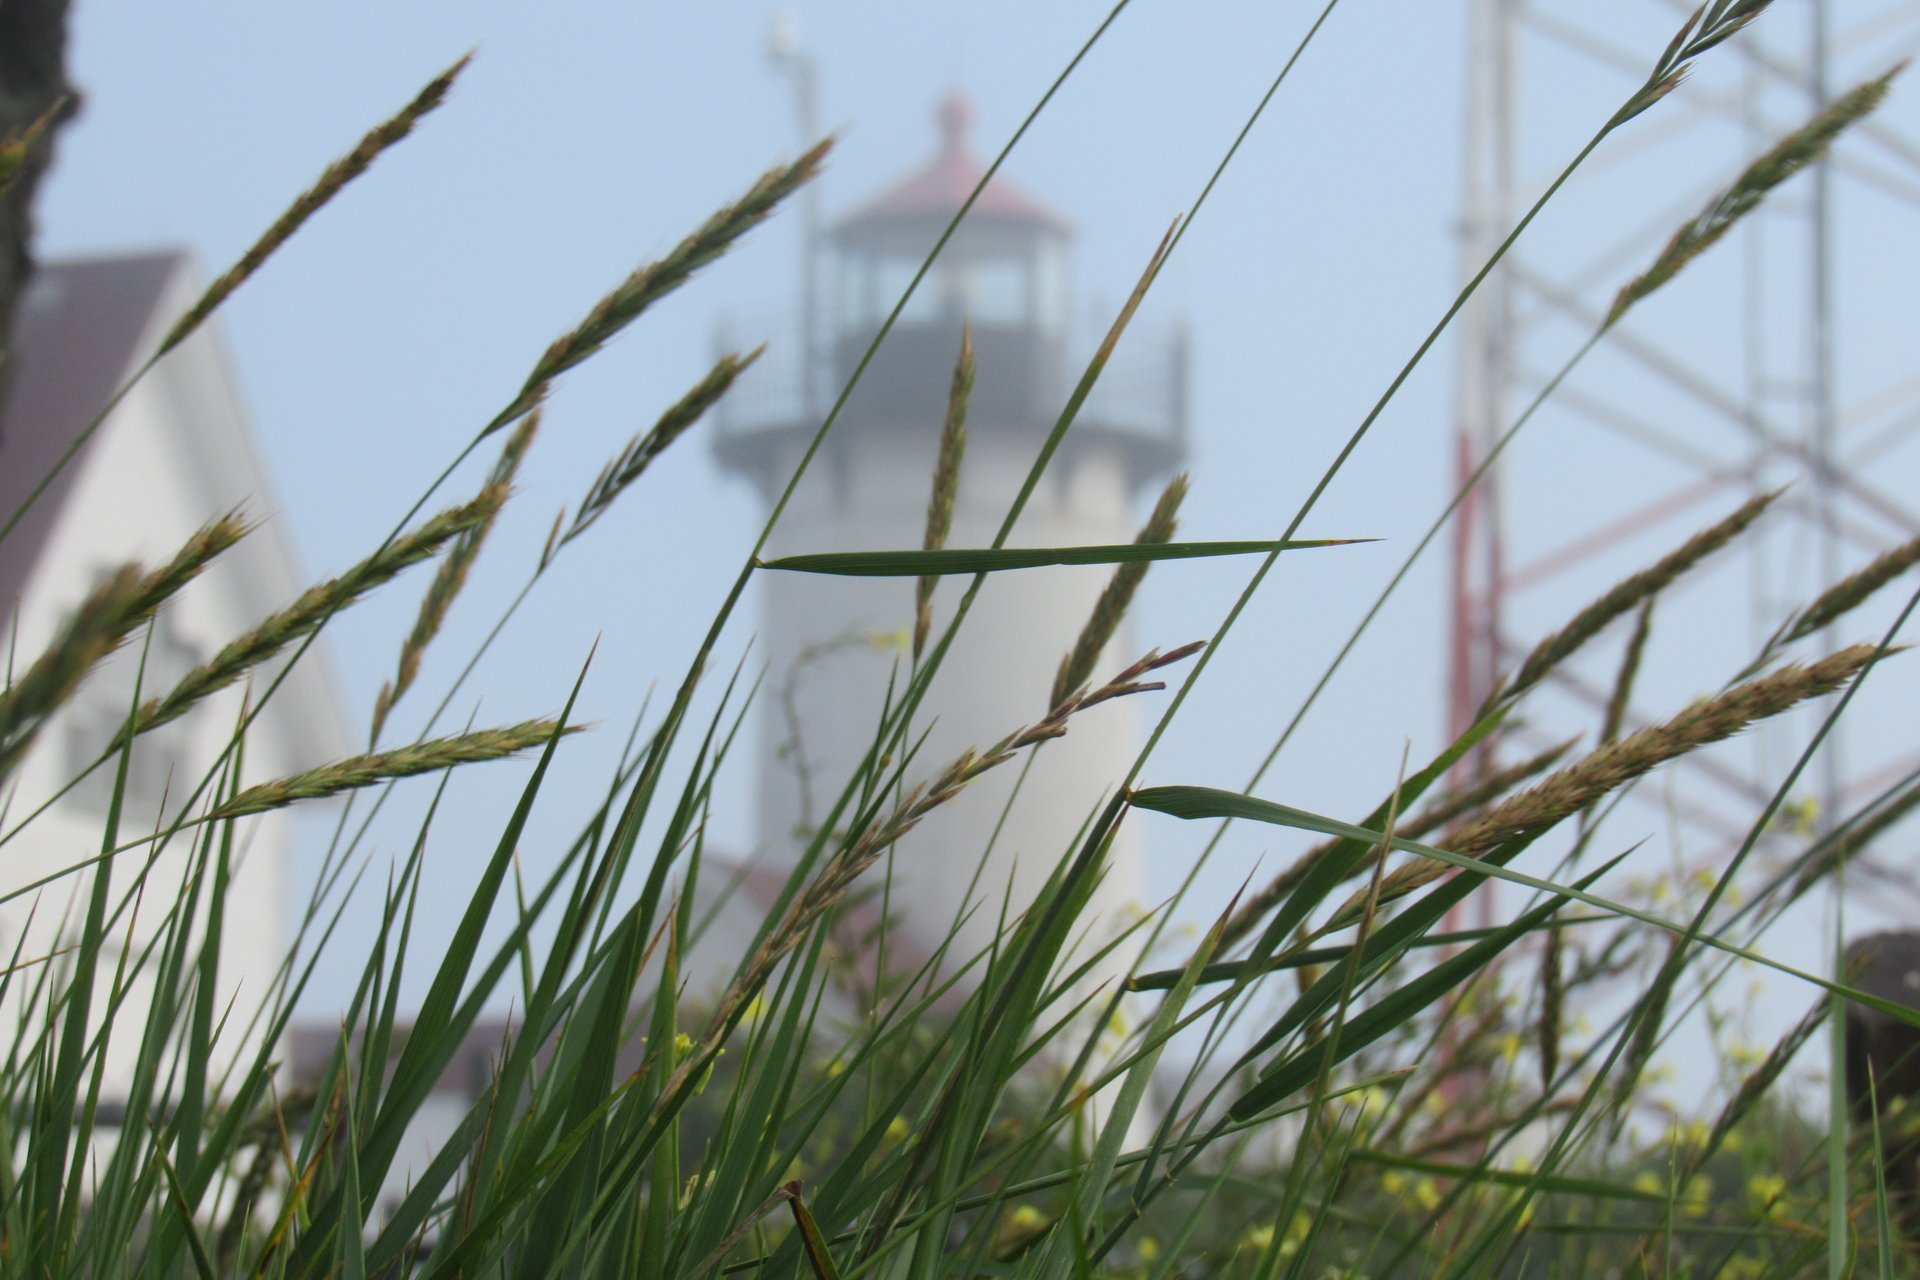 Long strands of green grass focused in the forefront, with a white lighthouse out of focus in the background.